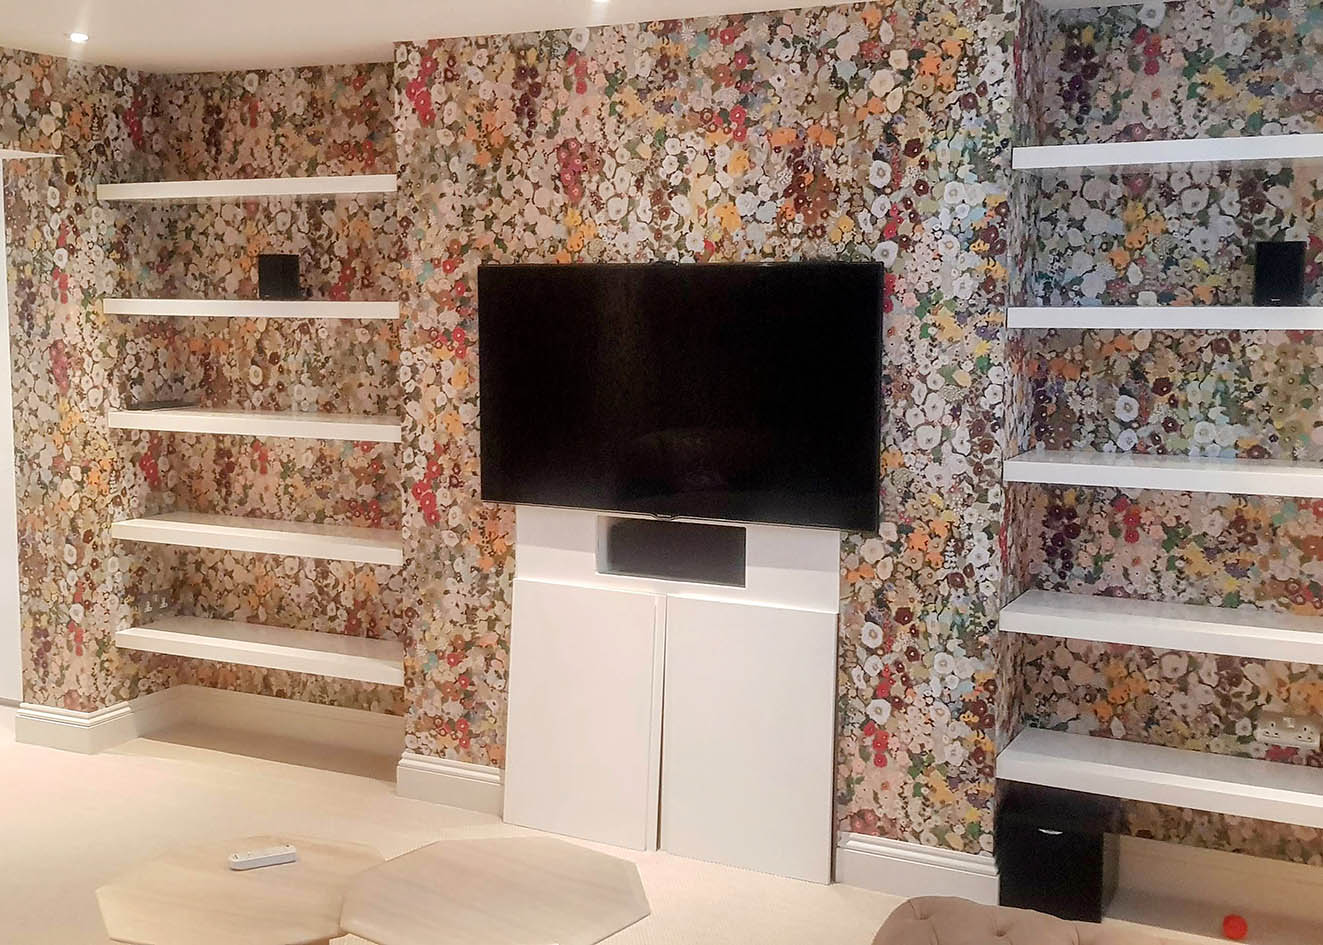 Floral wallpaper installation in a living room colourful.